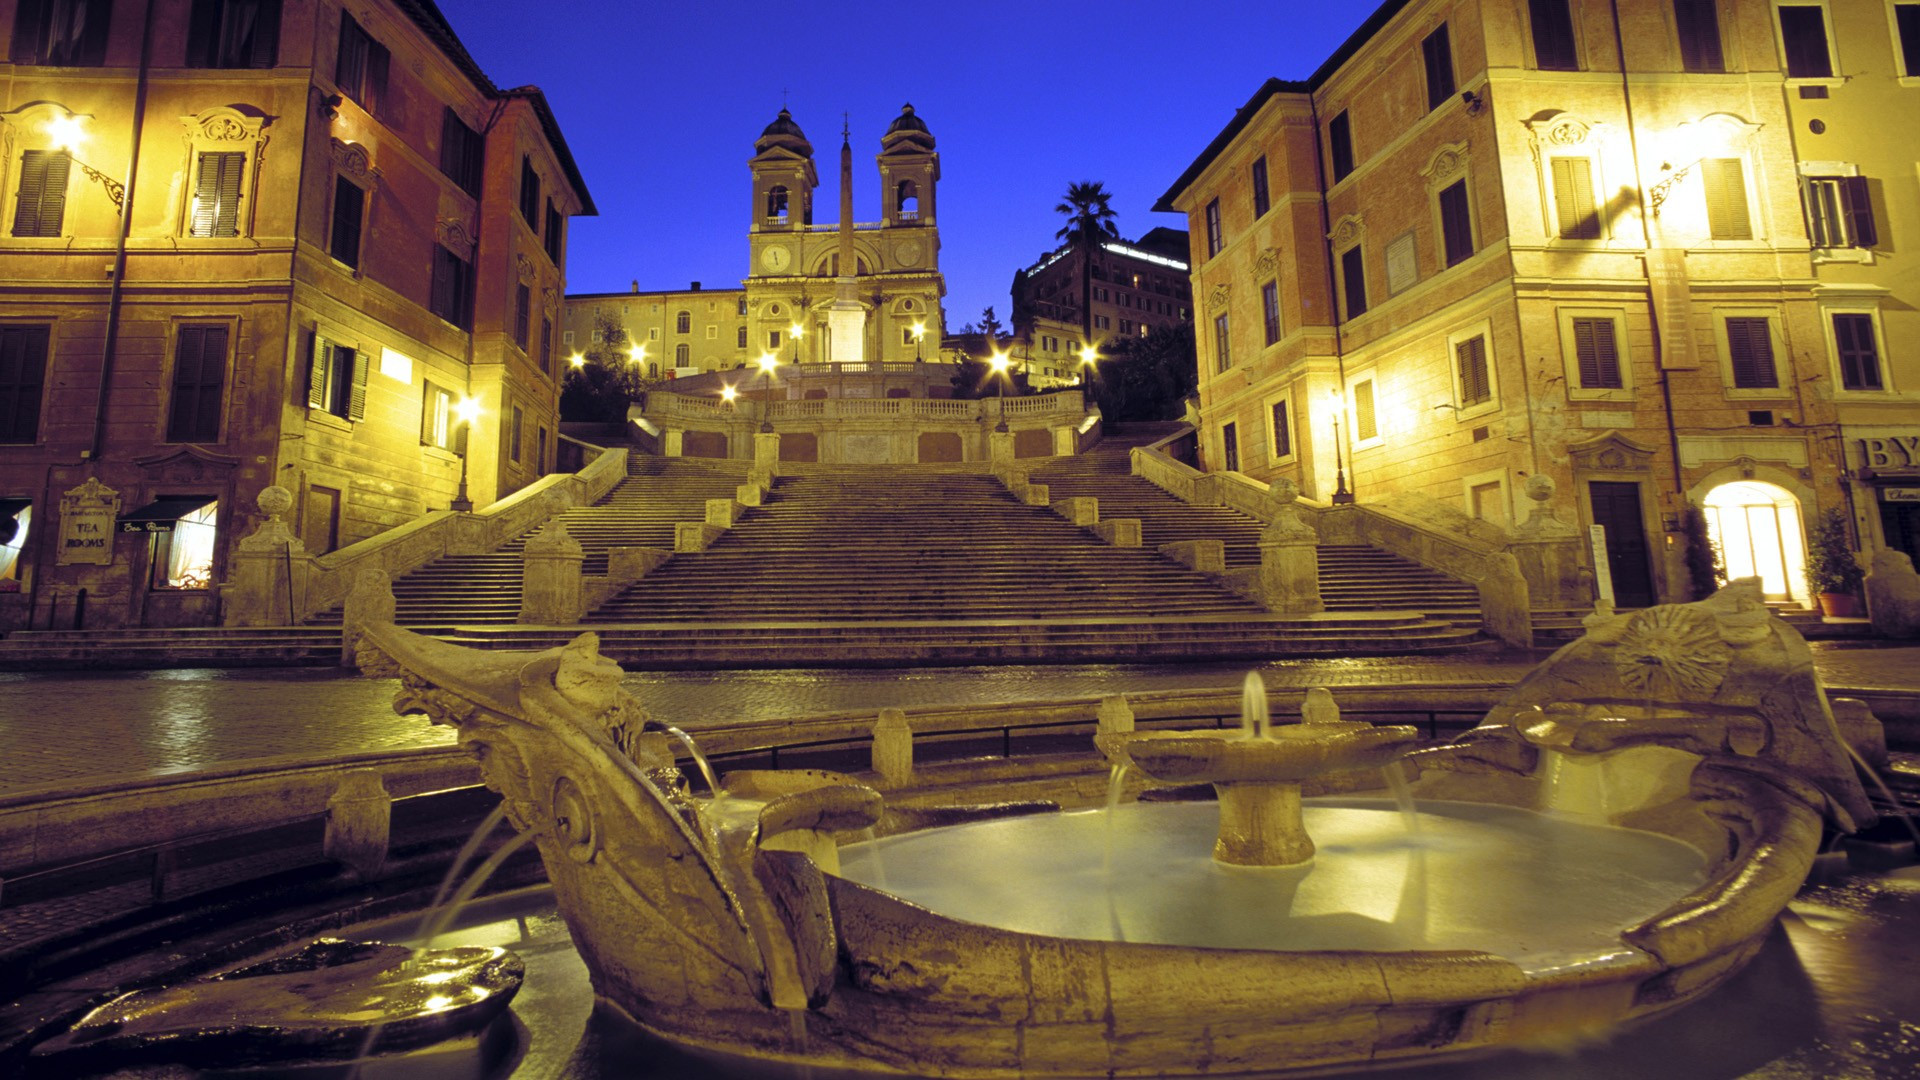 1920x1080 Spanish Steps at Dawn, Rome,Italy Proshots Professional Photos & Wallpapers